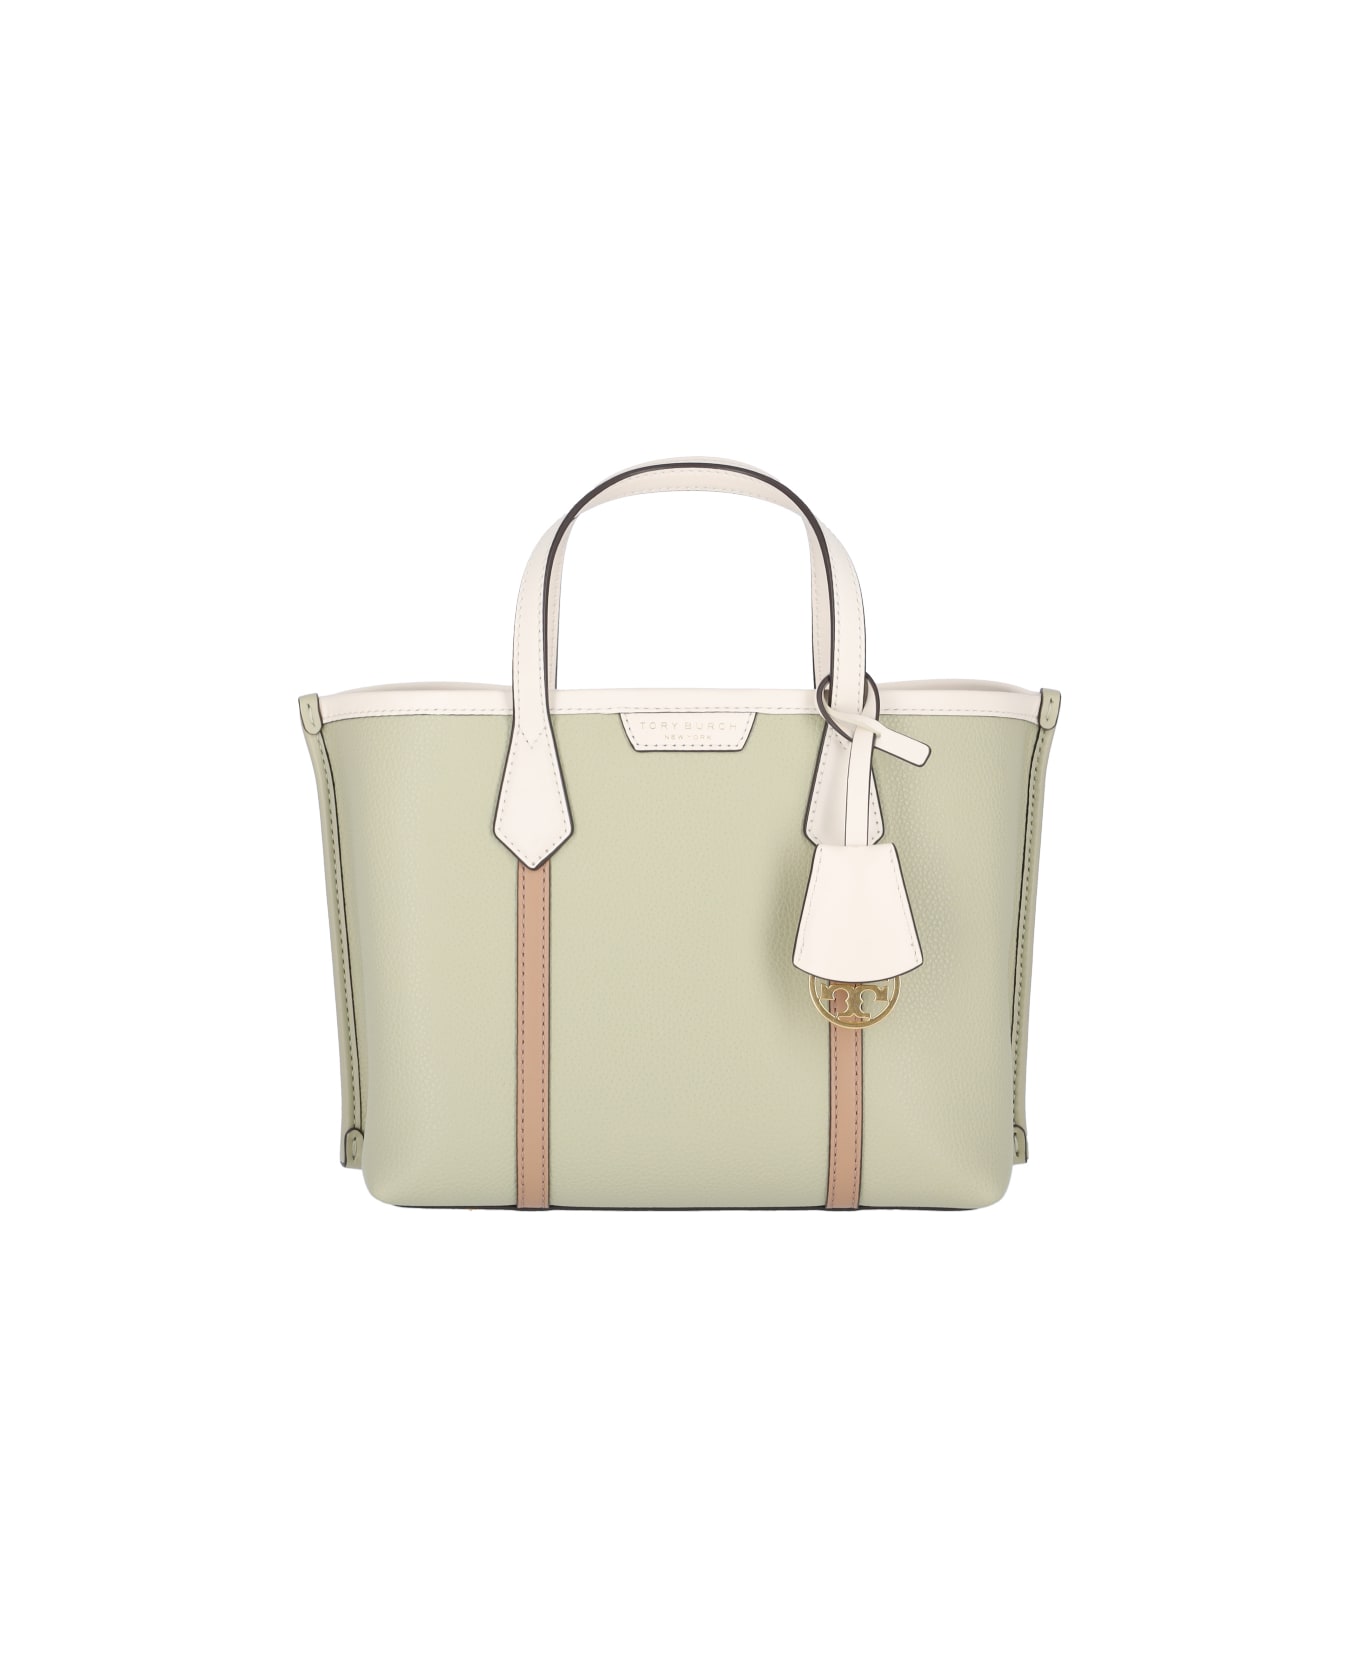 Tory Burch 'perry' Small Tote Bag - Green トートバッグ